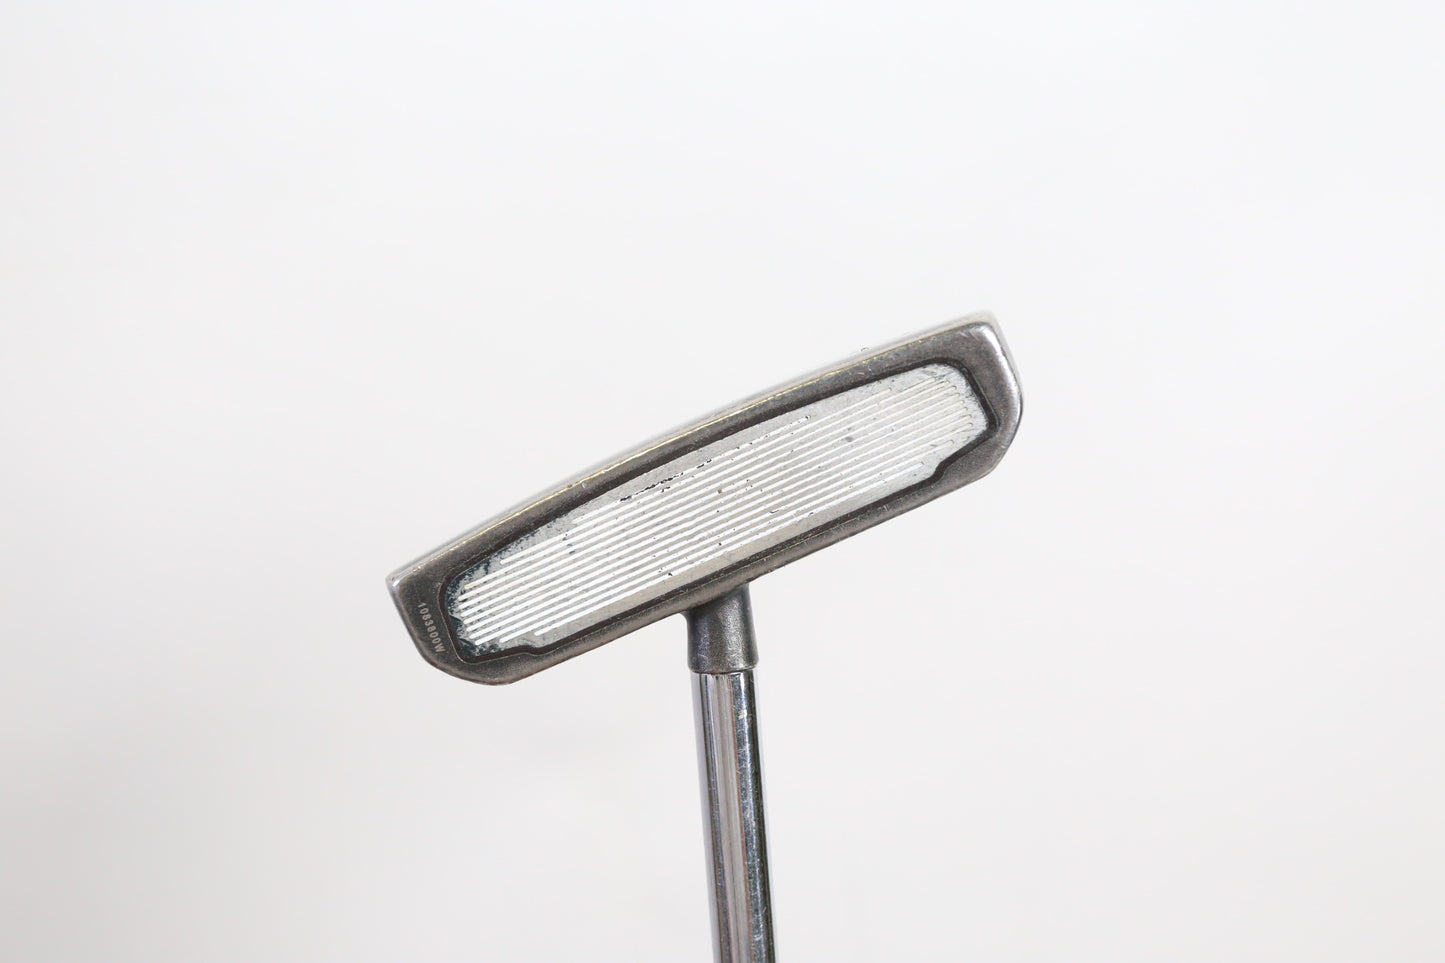 Used Ping Scottsdale TR Piper C Putter - Right-Handed - 35 in - Mid-mallet